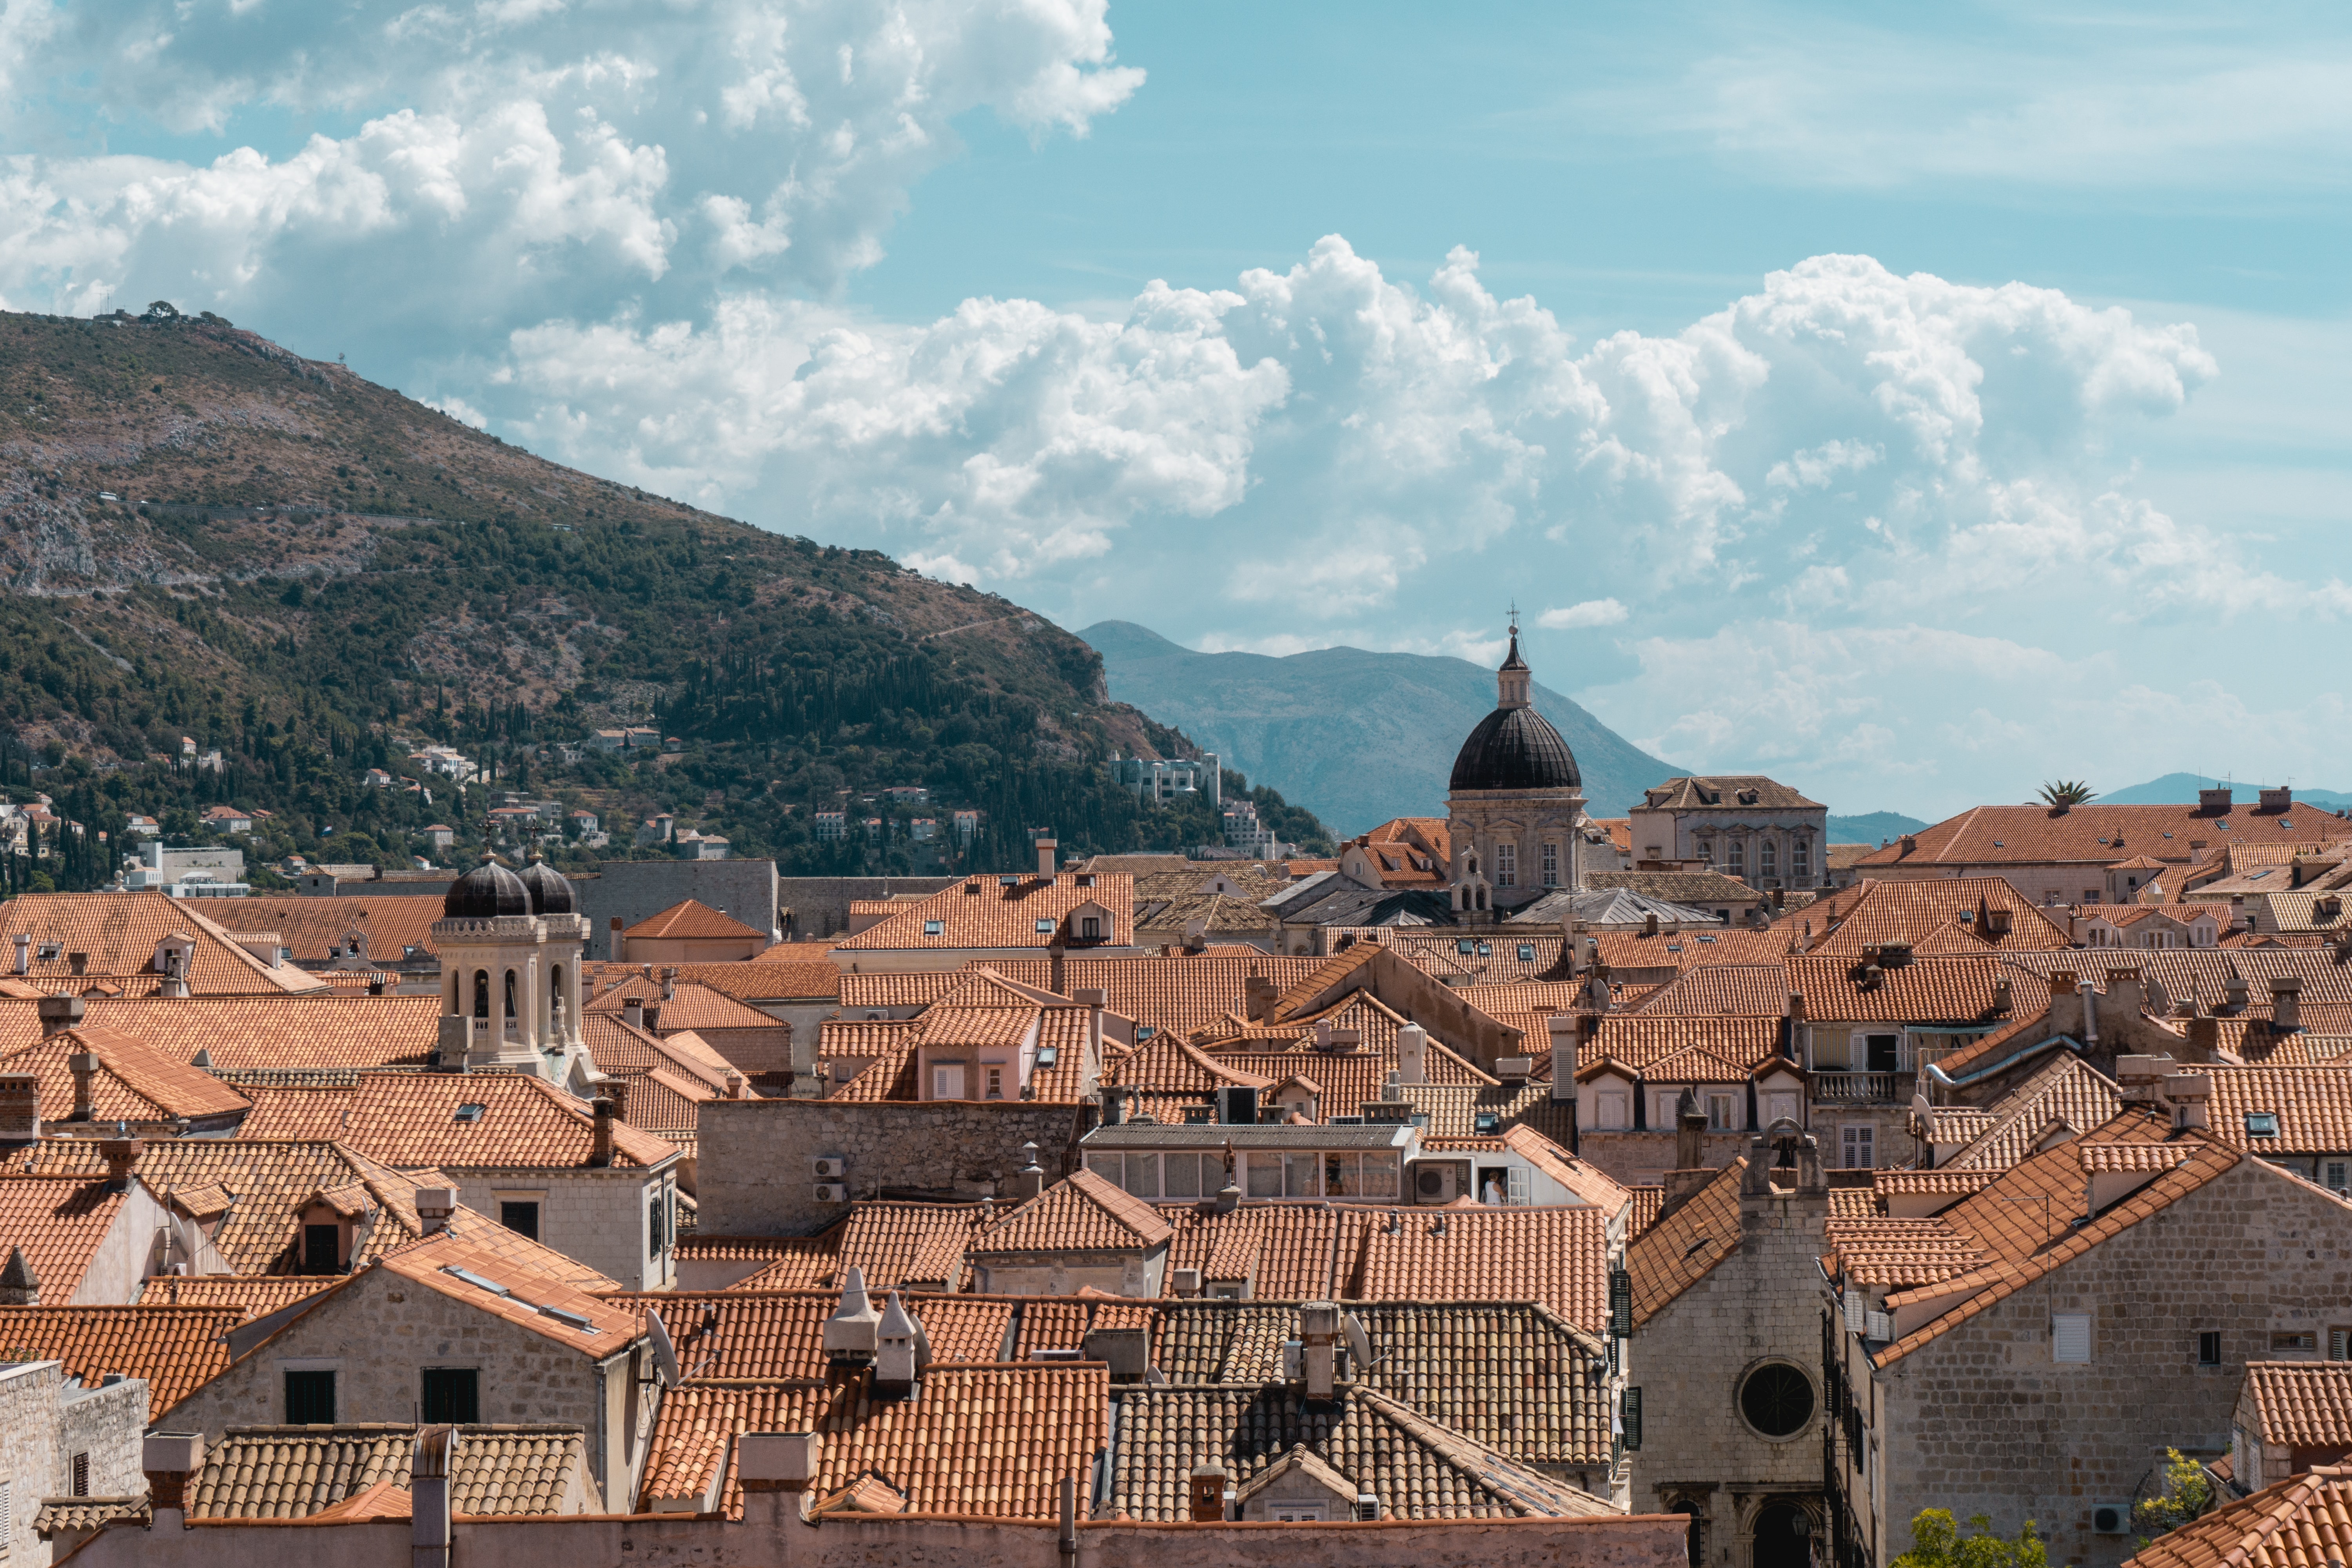 The old town of Dubrovnik, Croatia by Markus Clemens